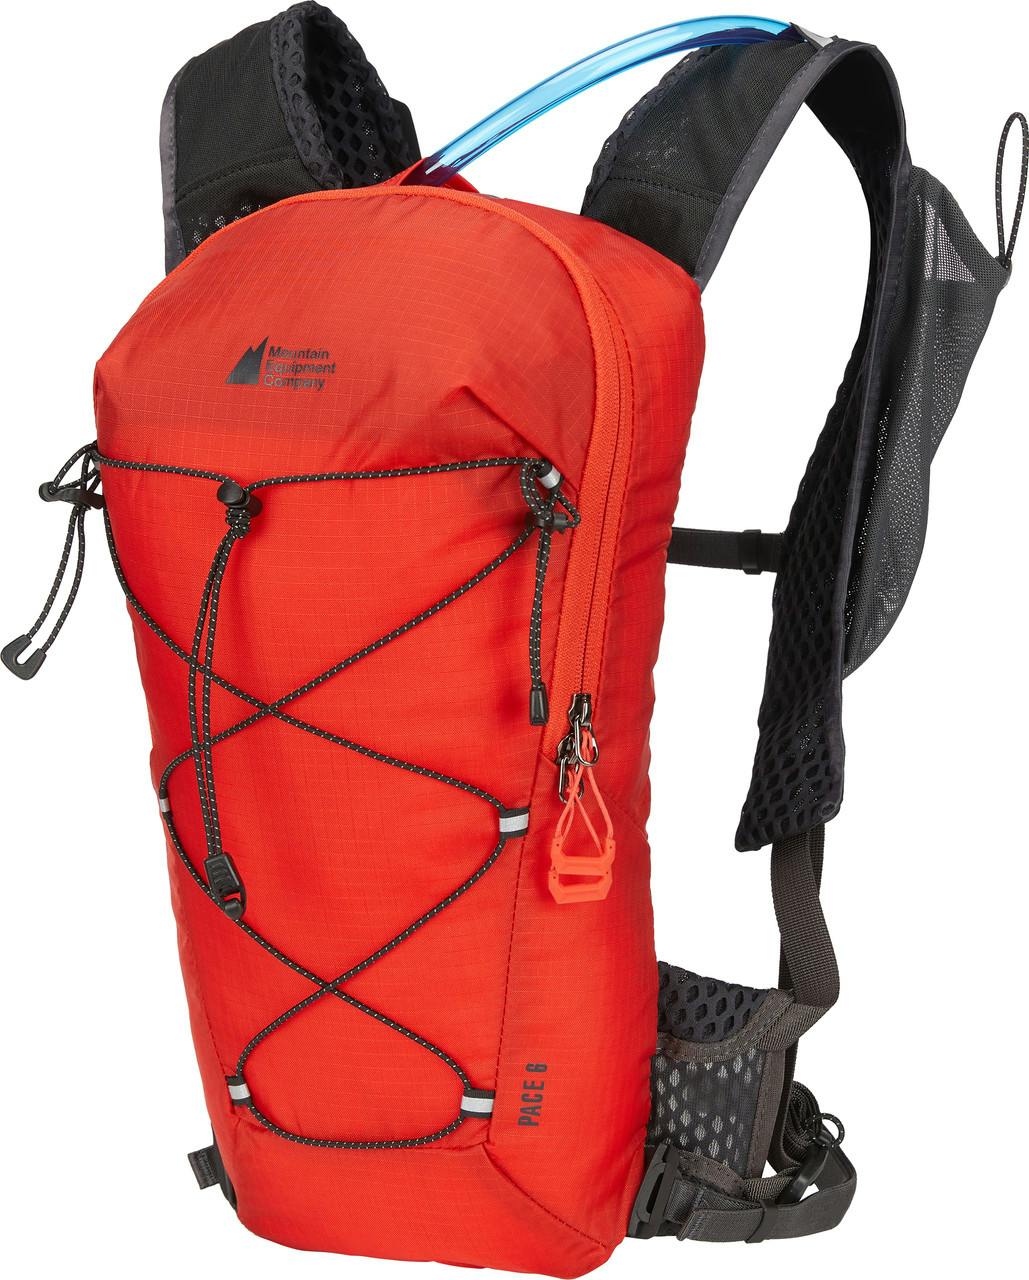 Sac d'hydratation Pace 6 Rouge fortune